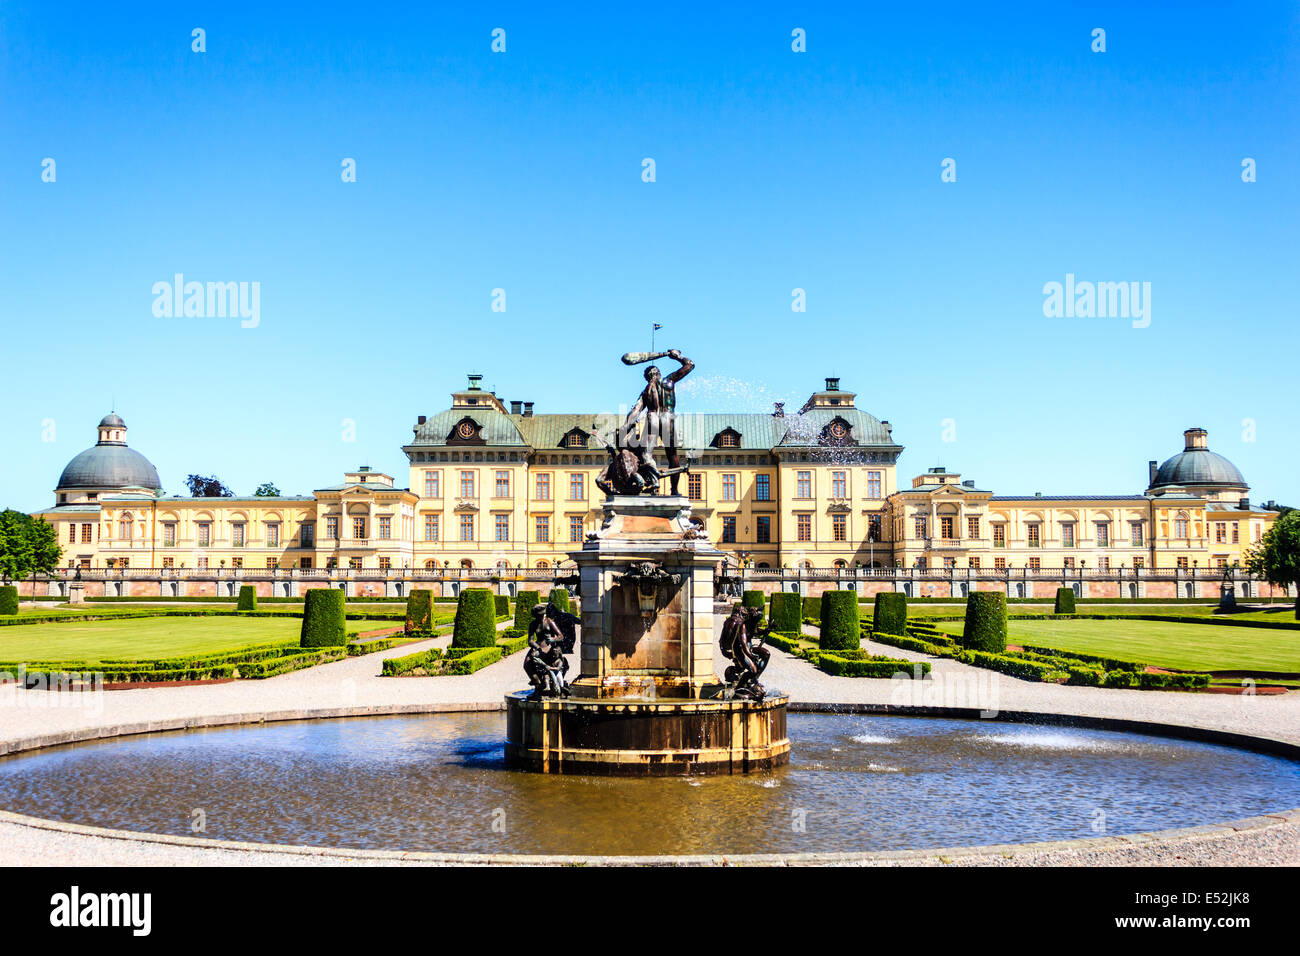 Fountain in front of Drottningholms slott (royal palace) outside of Stockholm, Sweden Stock Photo